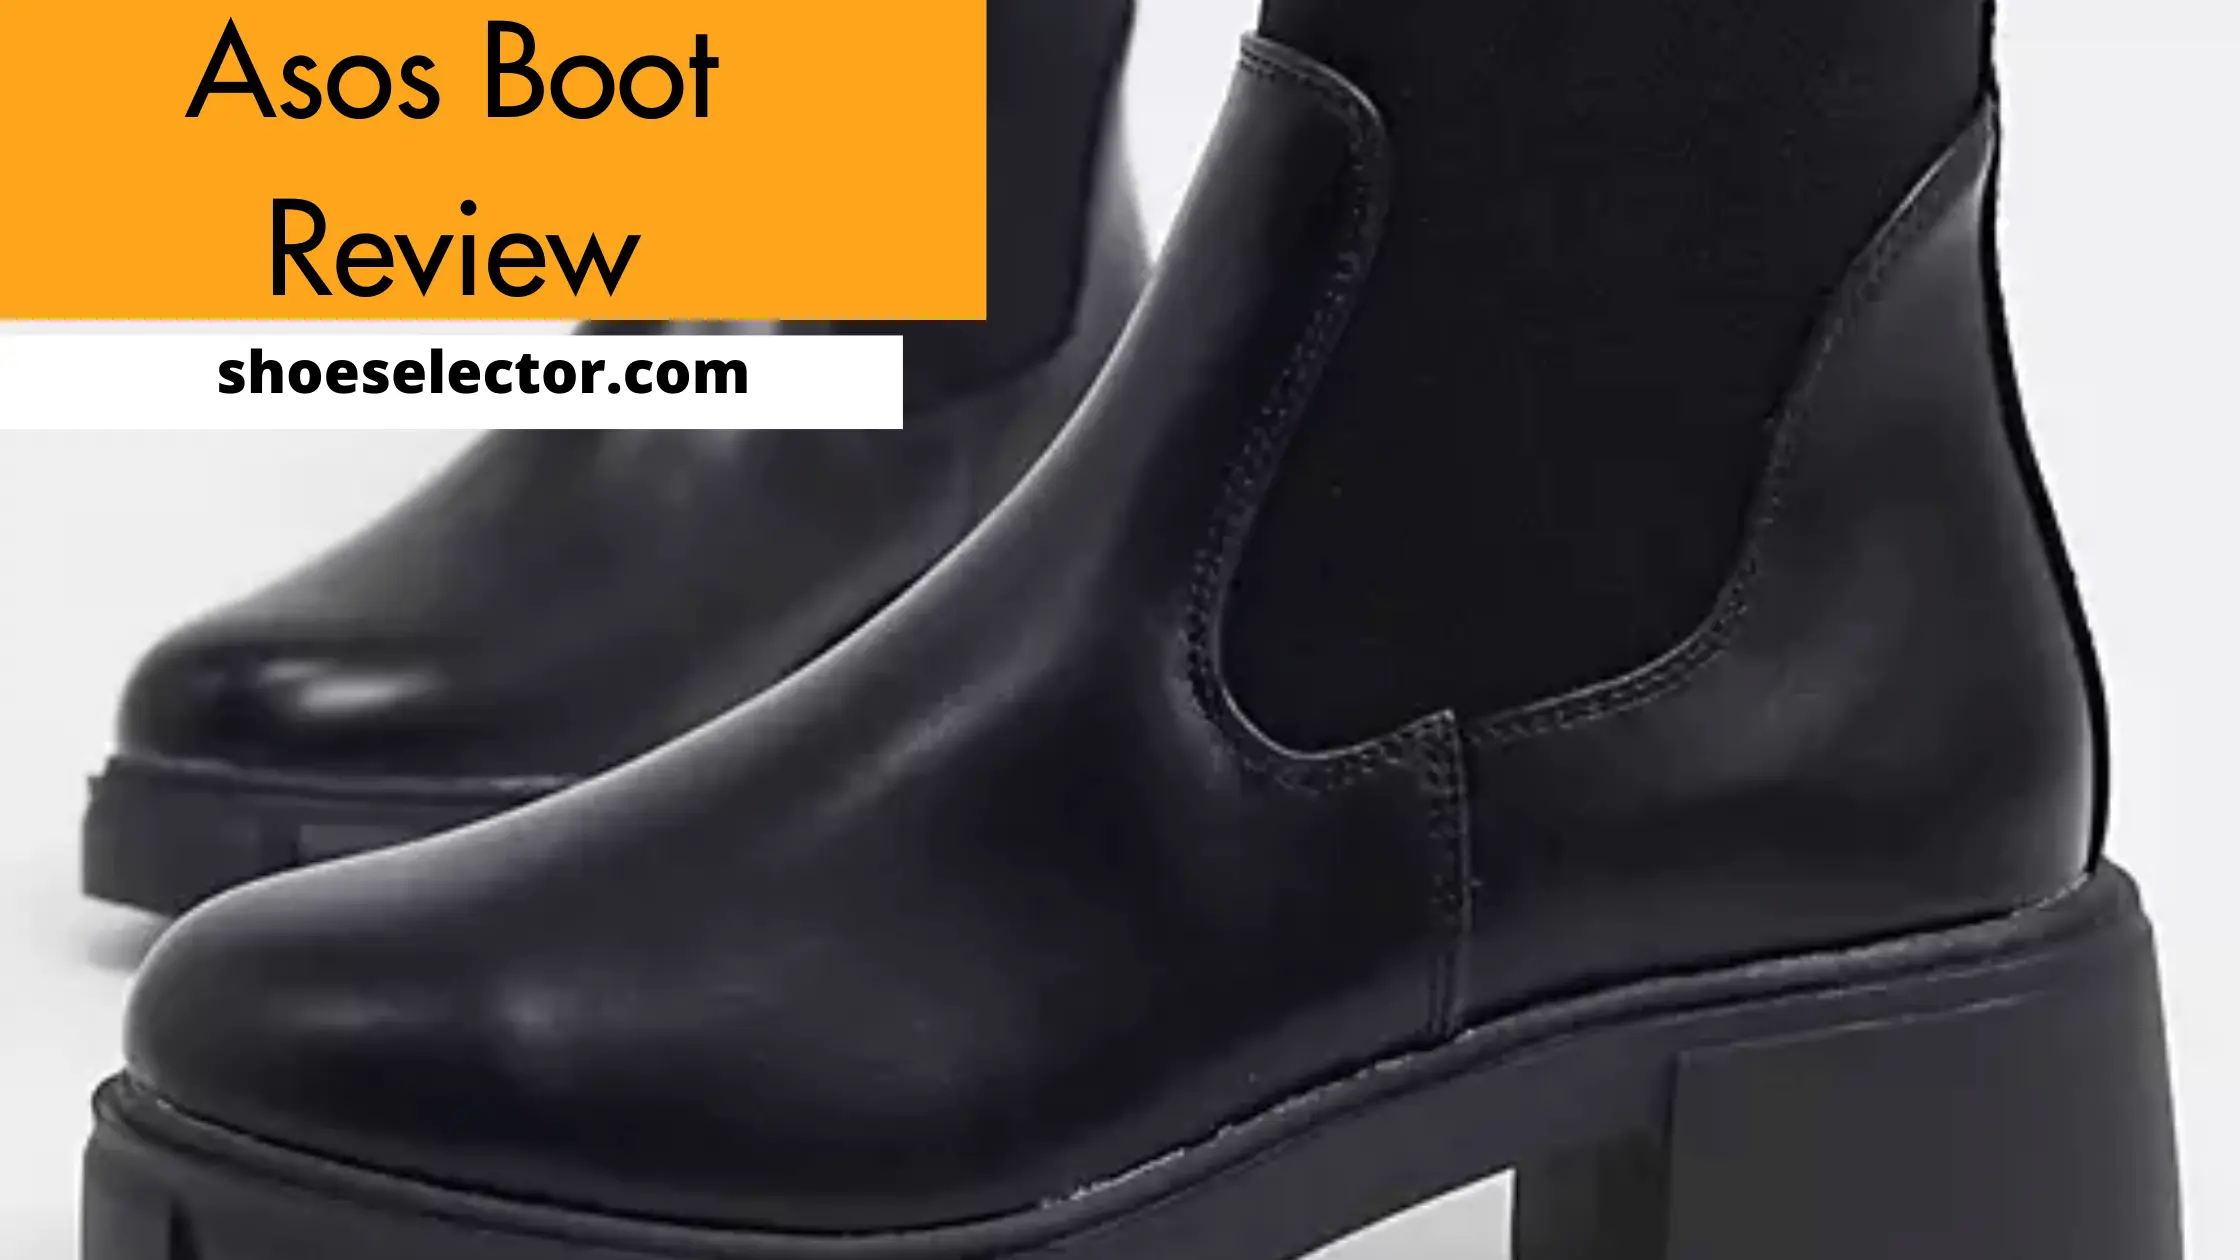 Asos Boot Review With Complete Shopping Tips